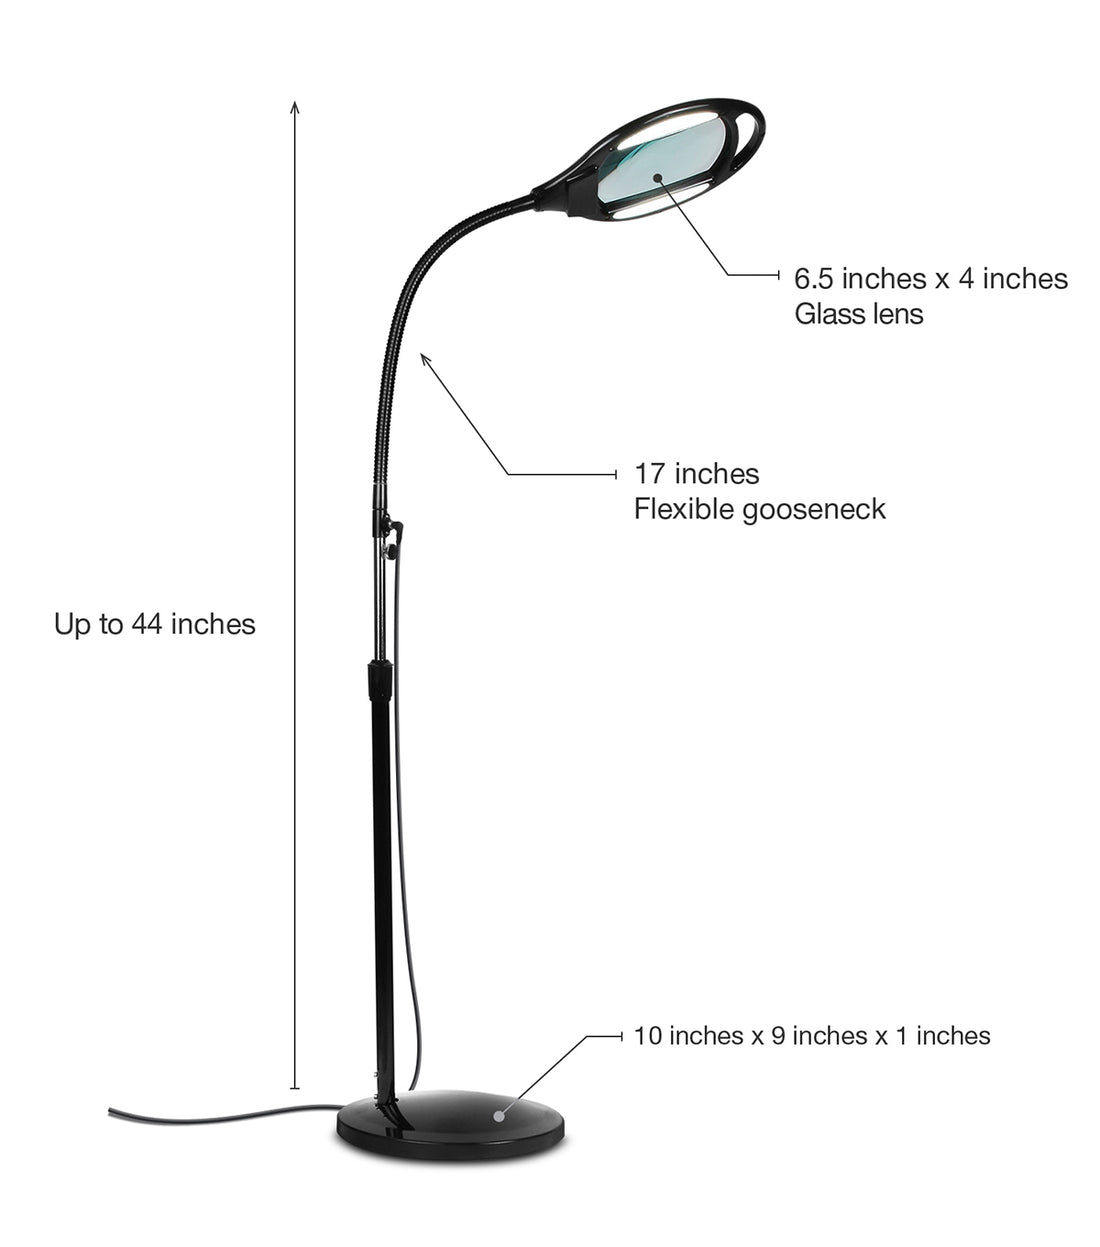  Brightech LightView Pro Flex 2 in 1 Magnifying Desk Lamp, 2.25x  Light Magnifier, Adjustable Magnifying Glass with Light for Crafts,  Reading, Close Work : Arts, Crafts & Sewing